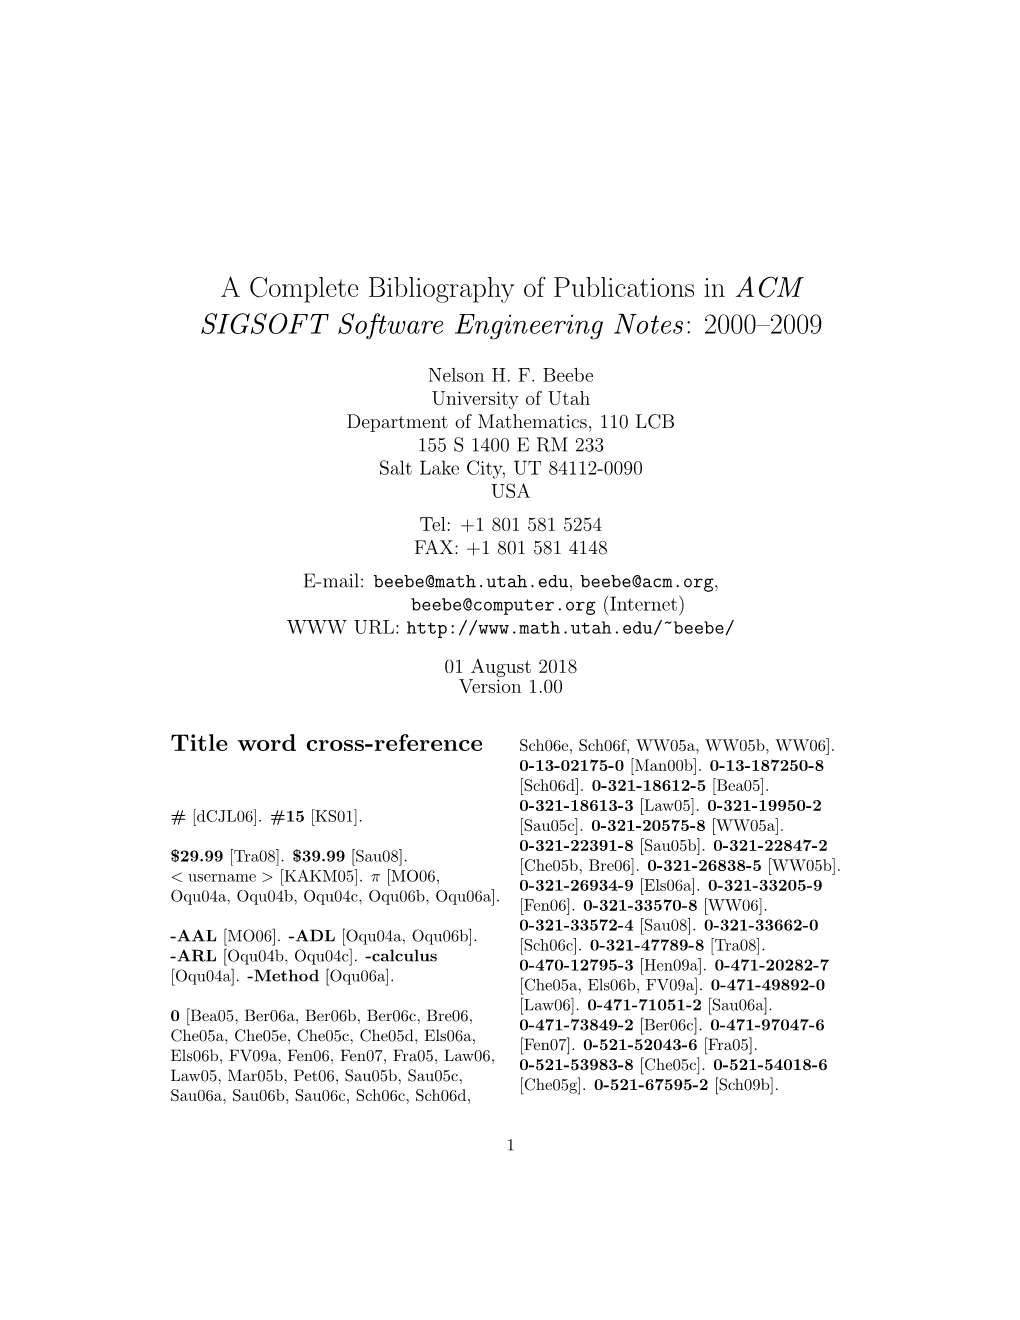 A Complete Bibliography of Publications in ACM SIGSOFT Software Engineering Notes: 2000–2009